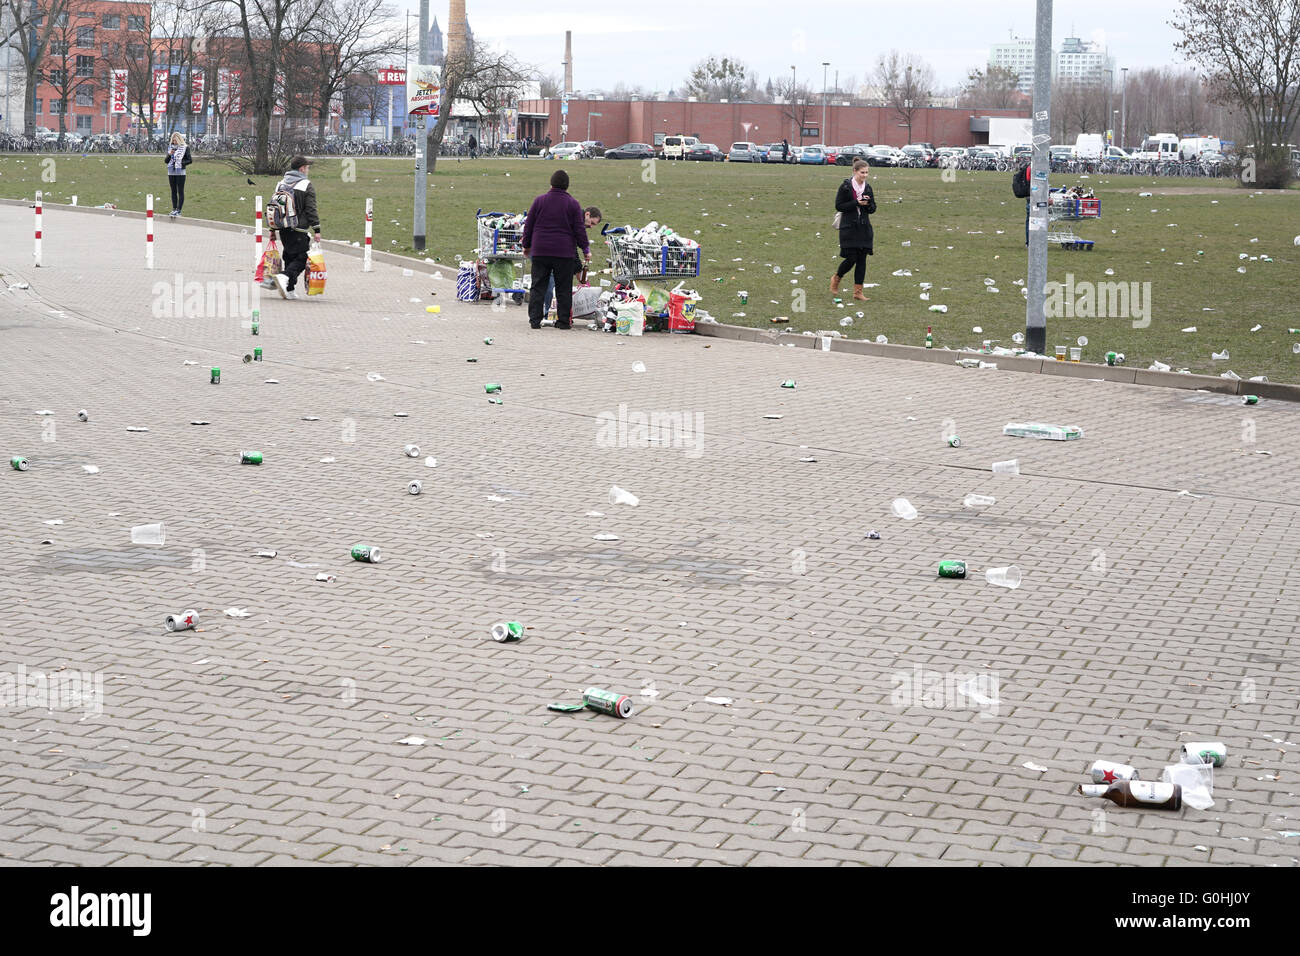 garbage problem in front of a soccer stadium in Magdeburg Stock Photo